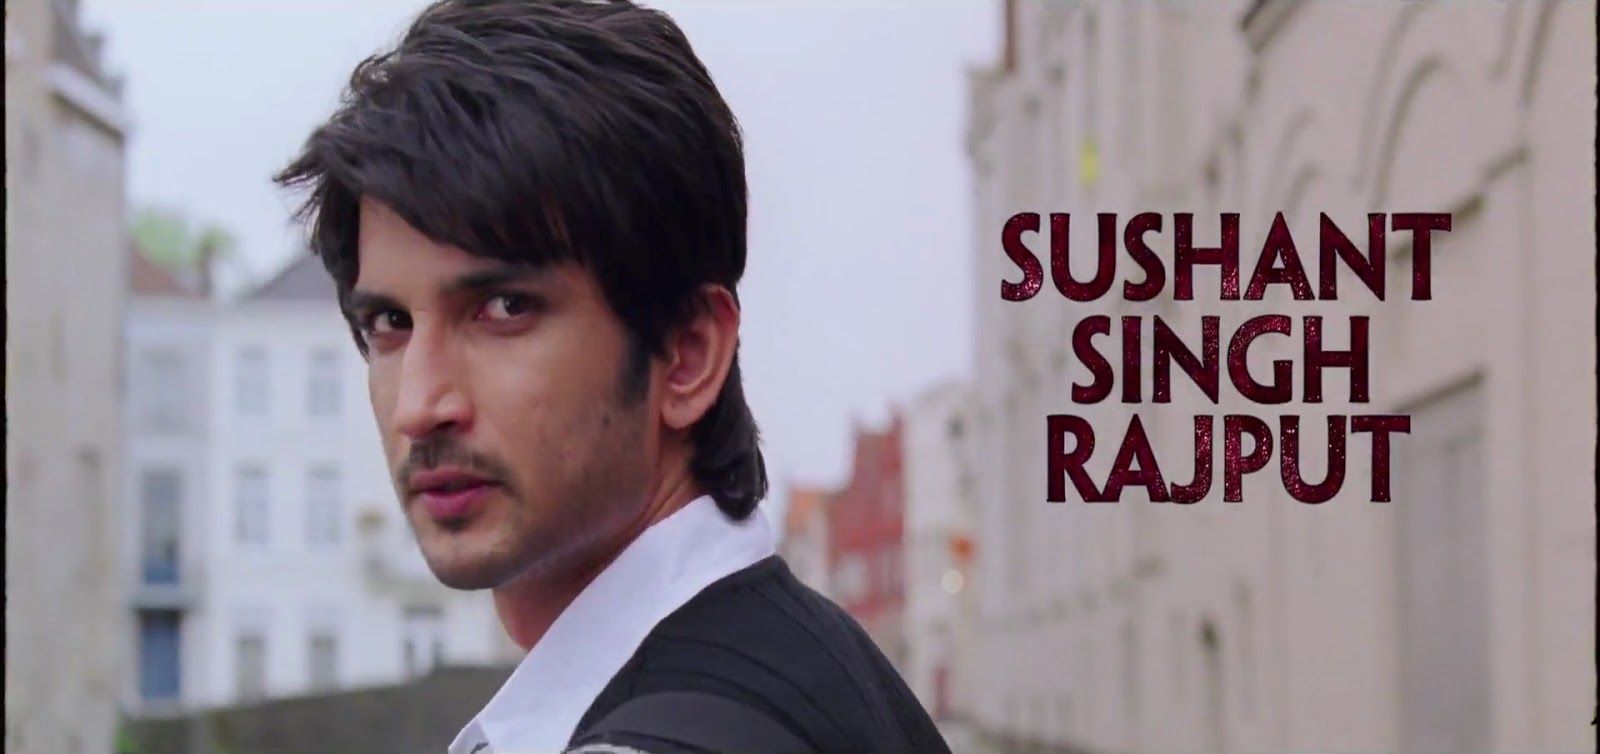 Free HD Wallpaper: Sushant Singh Rajput Best Acter of Bollywood